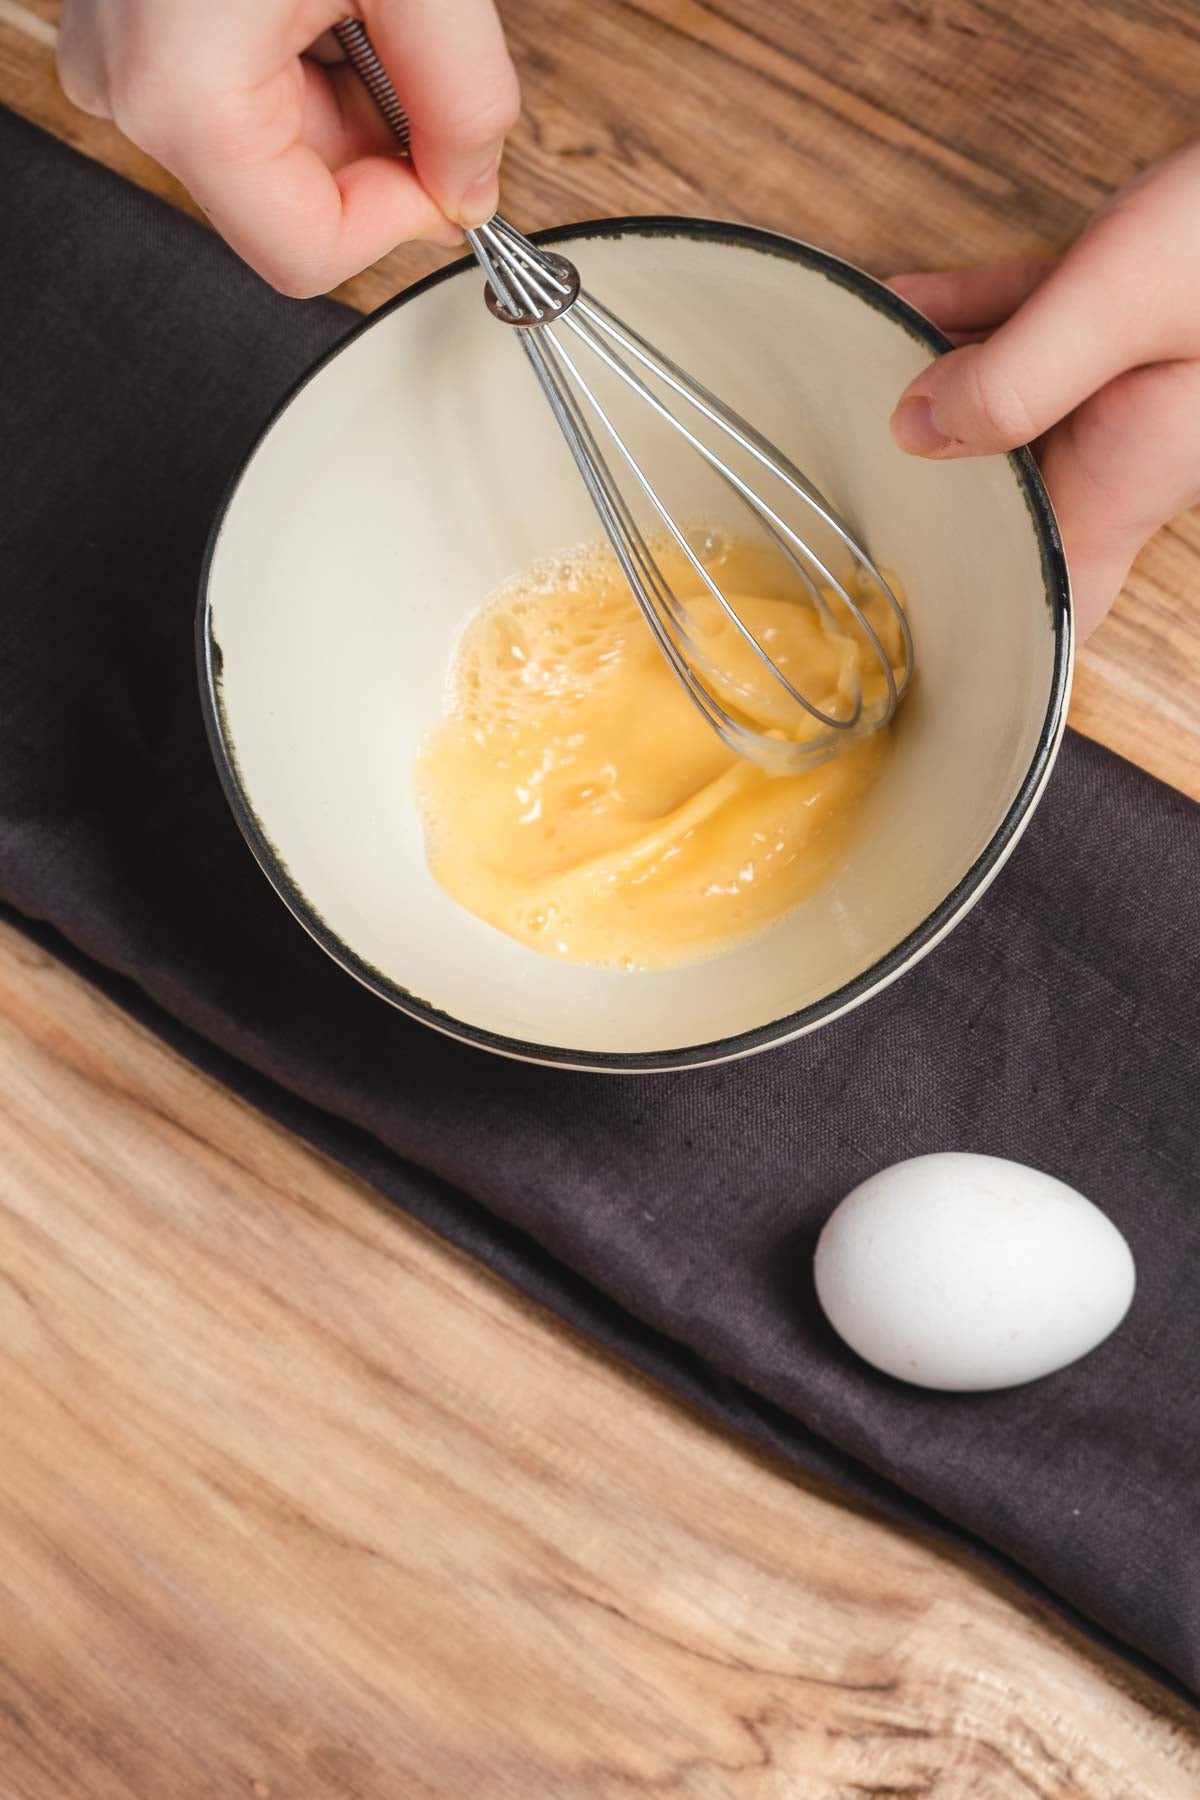 Charcoal pure linen tea towel underneath bowl whisking eggs to prevent slipping